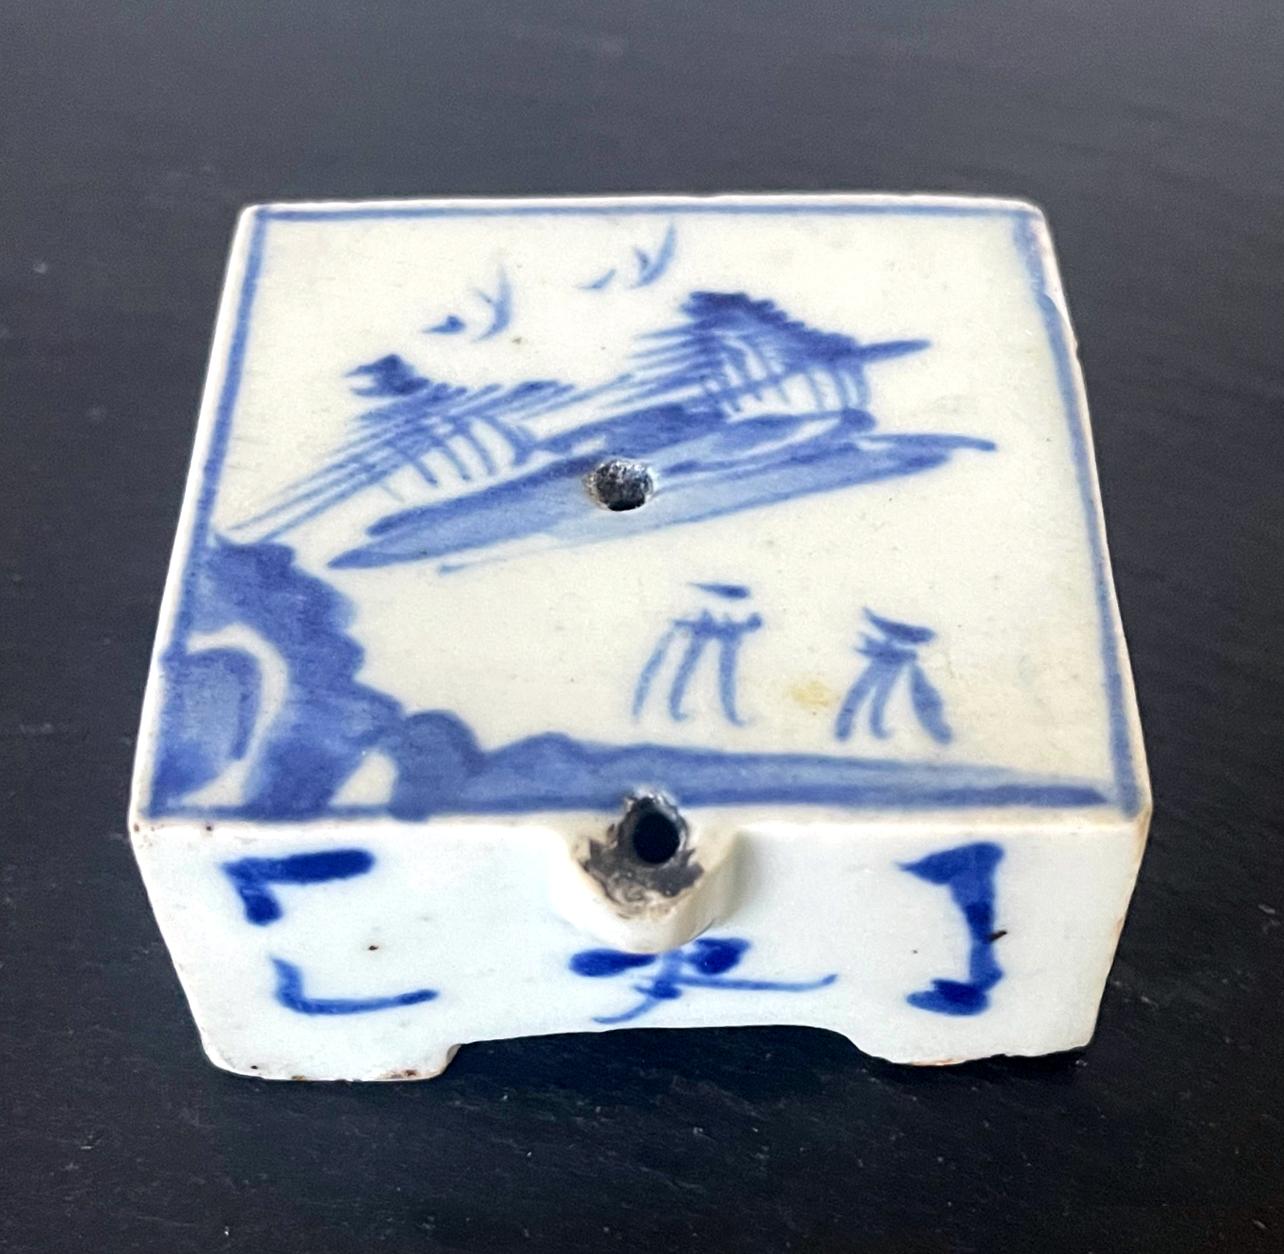 A small Korean ceramic water dropper in square form on four corner feet, circa 19th century late Joseon Dynasty. The piece features an underglaze blue painting of a landscape with mountains and sailing boats on water, set on white glazed background.